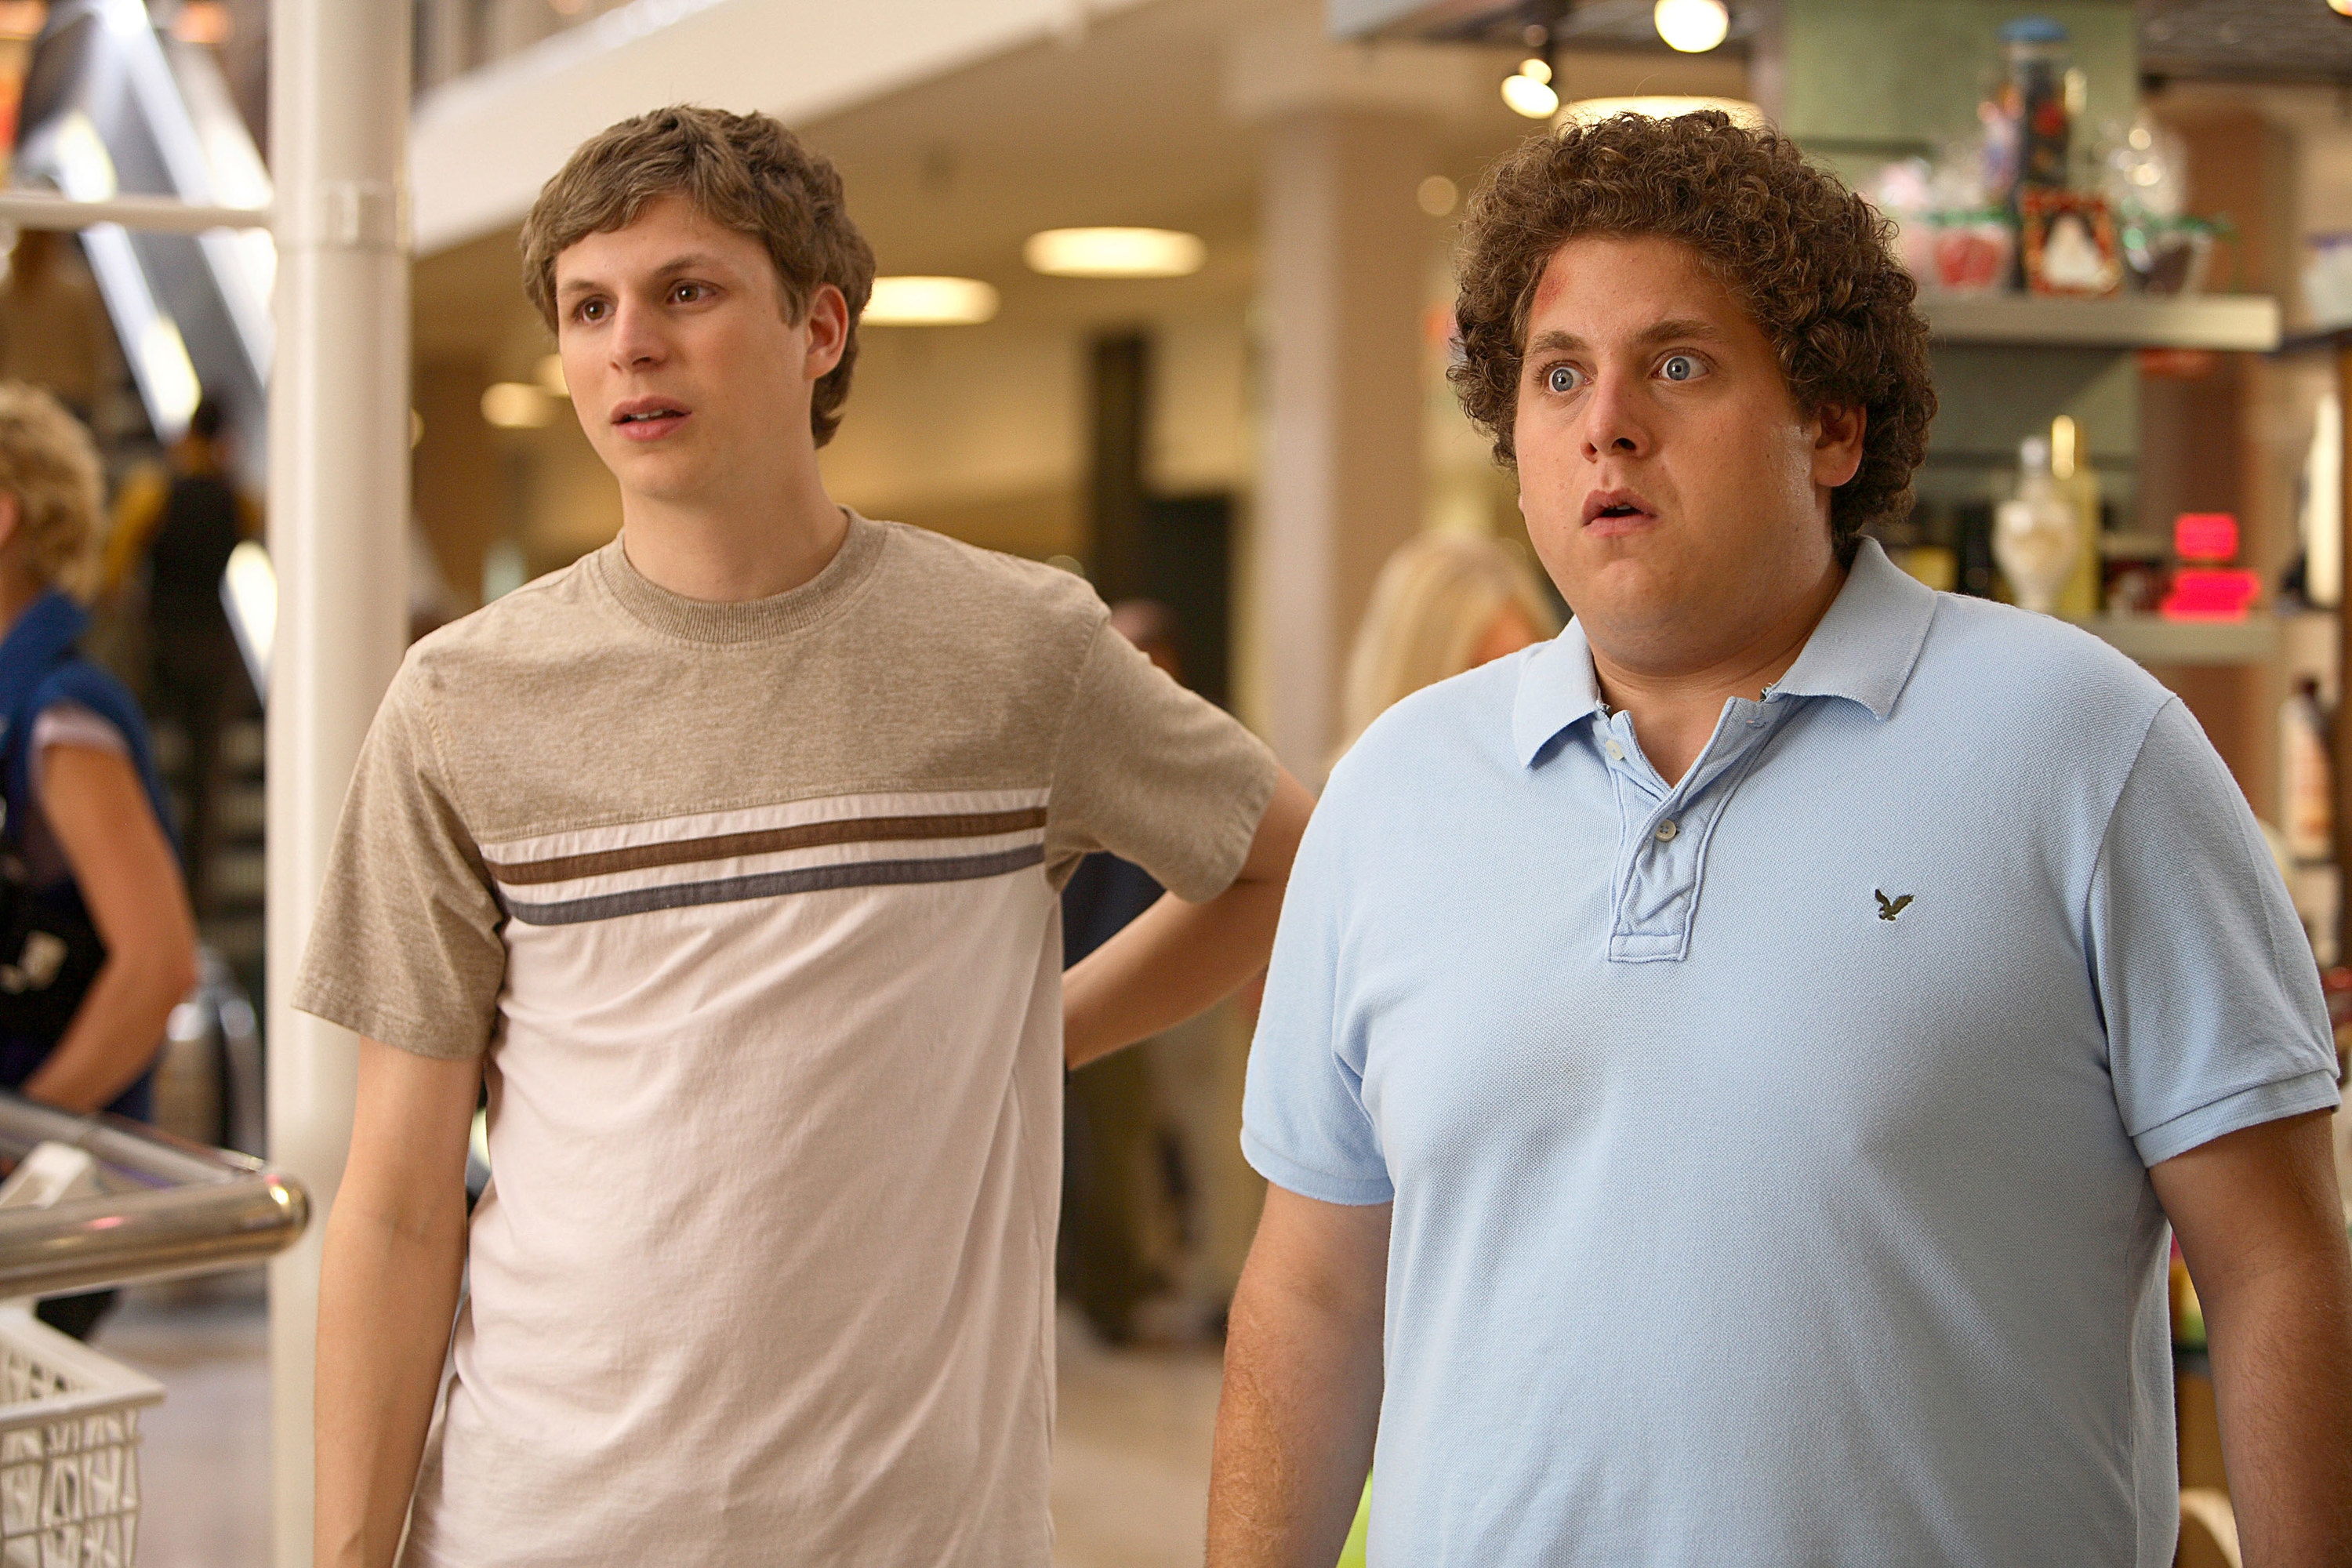 Michael Cera and Jonah Hill stand in a mall